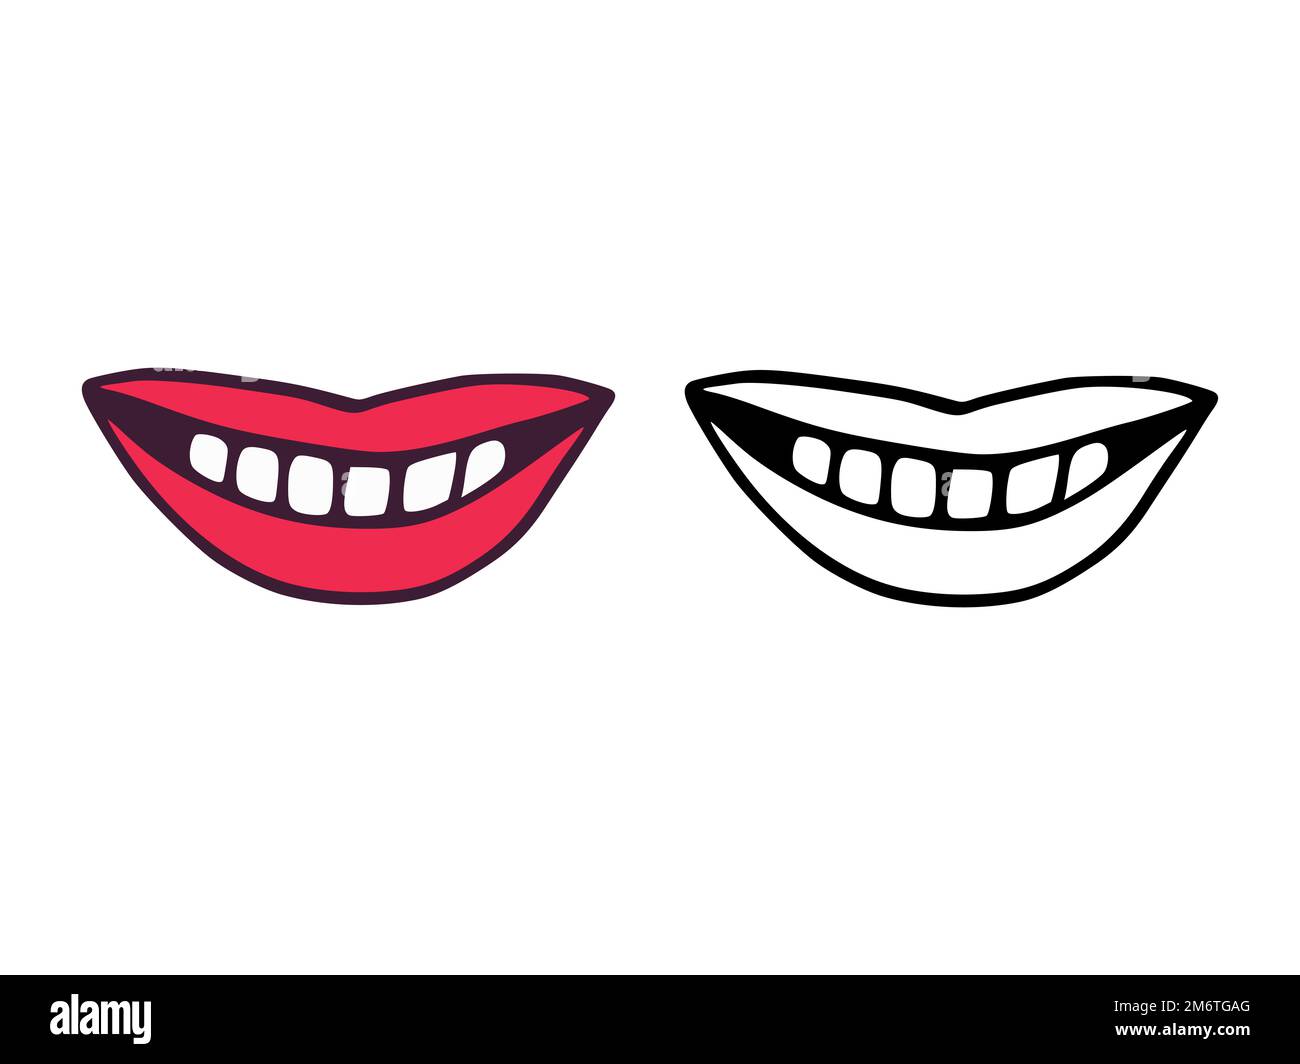 Mouth or lips with teeth in cartoon and outline style isolated on white background. Smile clip art Stock Photo